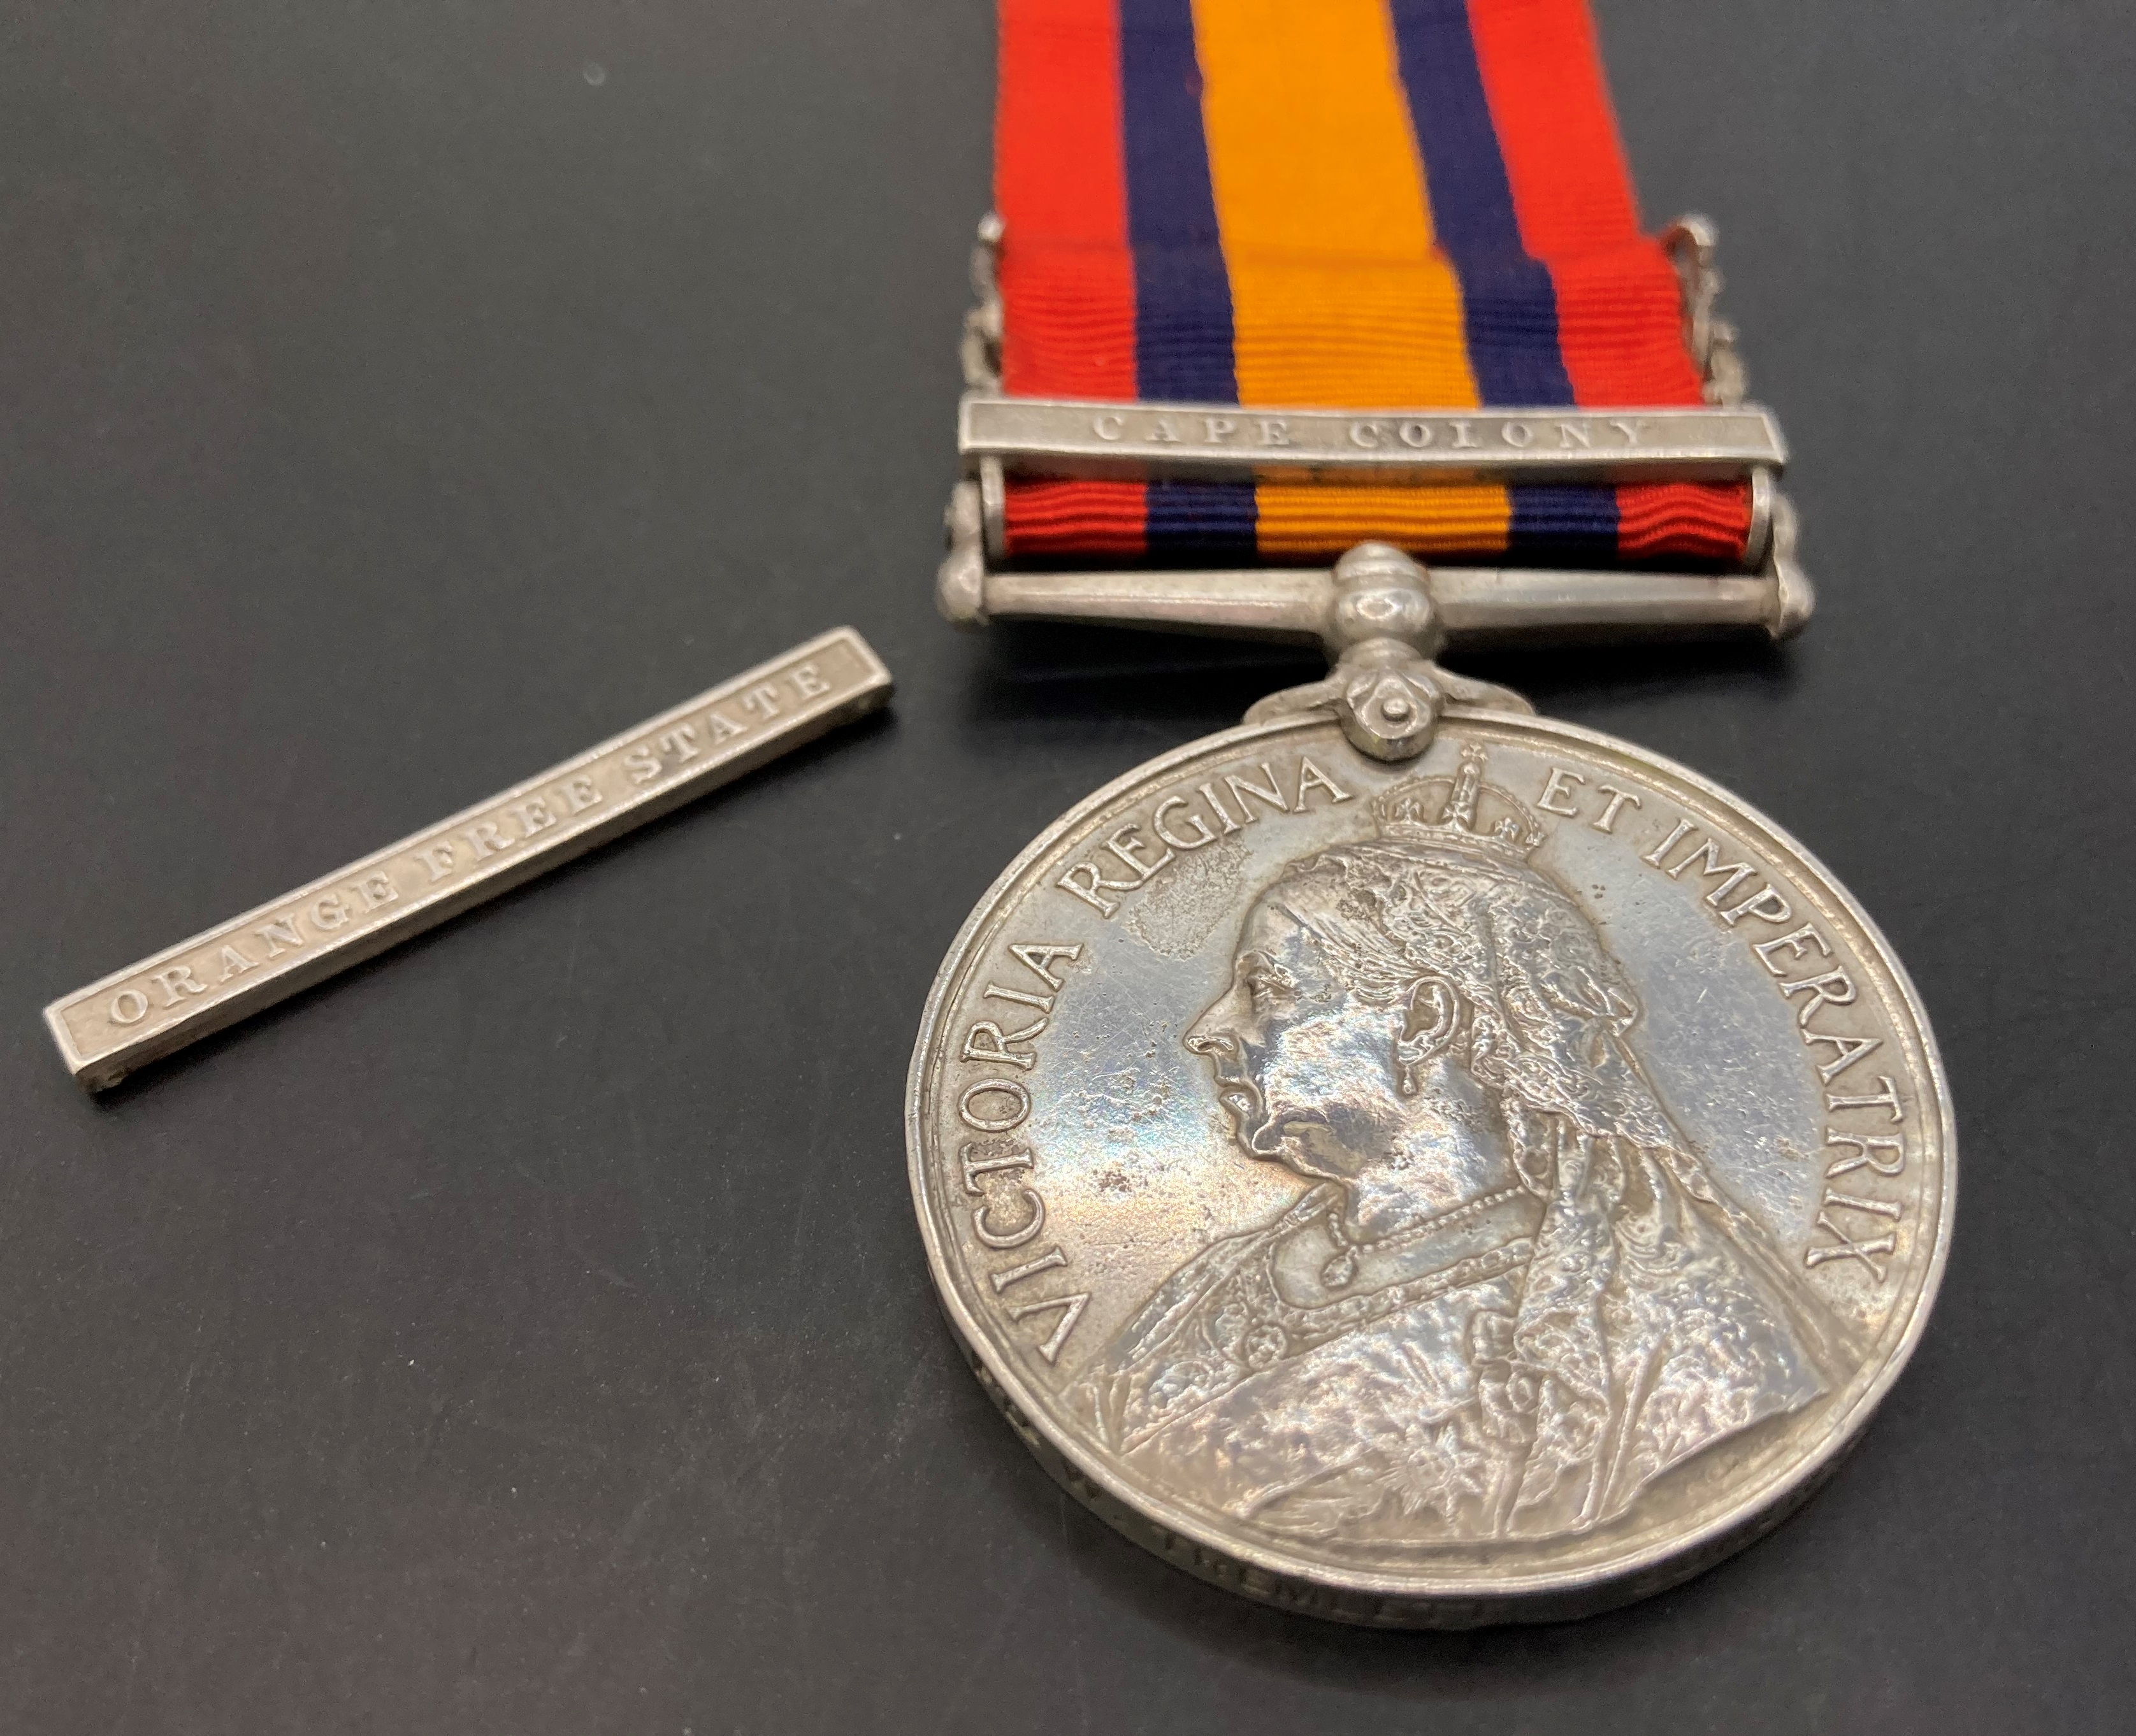 Queens South Africa Medal with clasps for Cape Colony and Orange Free State complete with ribbon to - Image 2 of 4